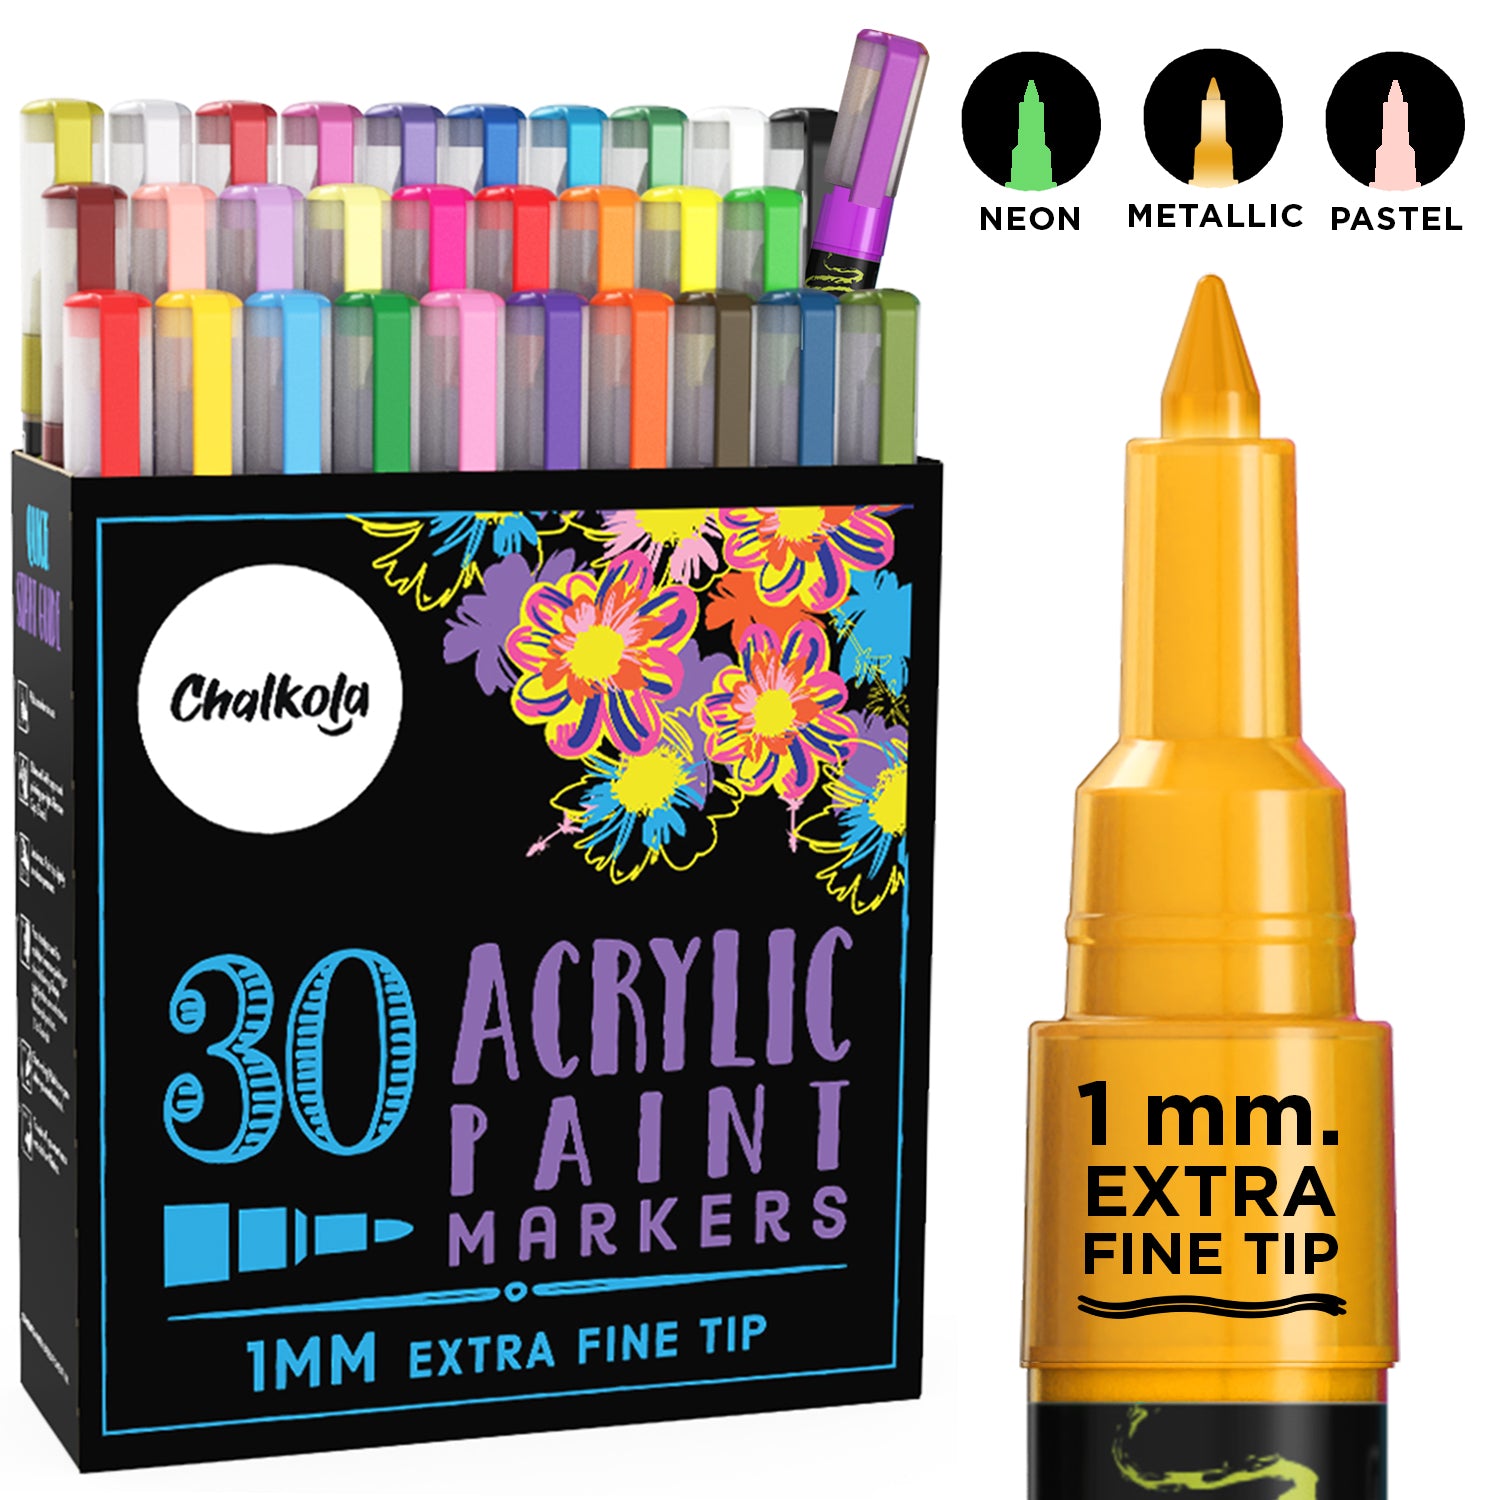 ACRYLIC MARKERS - HIGHLY OPAQUE ON NEARLY ALL SURFACES